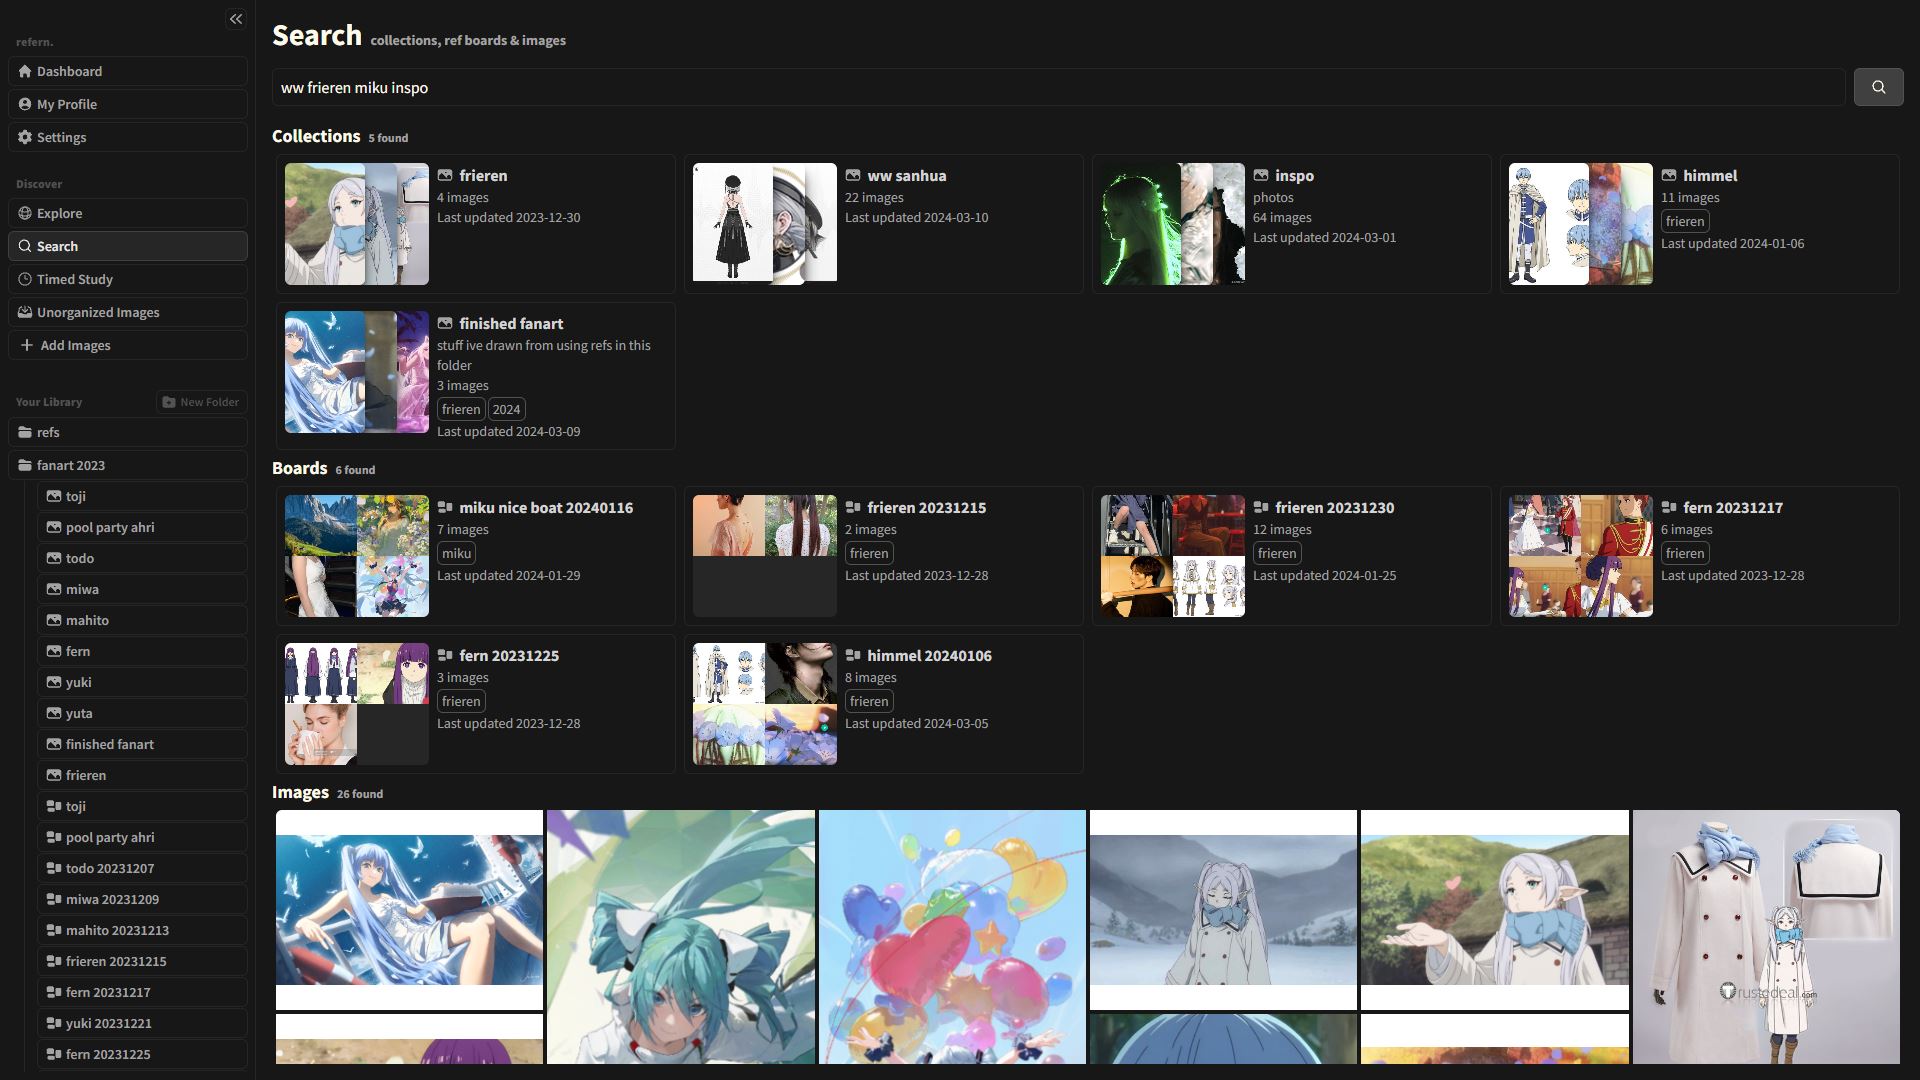 refern. Search page searching for images, collections, or moodboard all at once with multiple search terms 